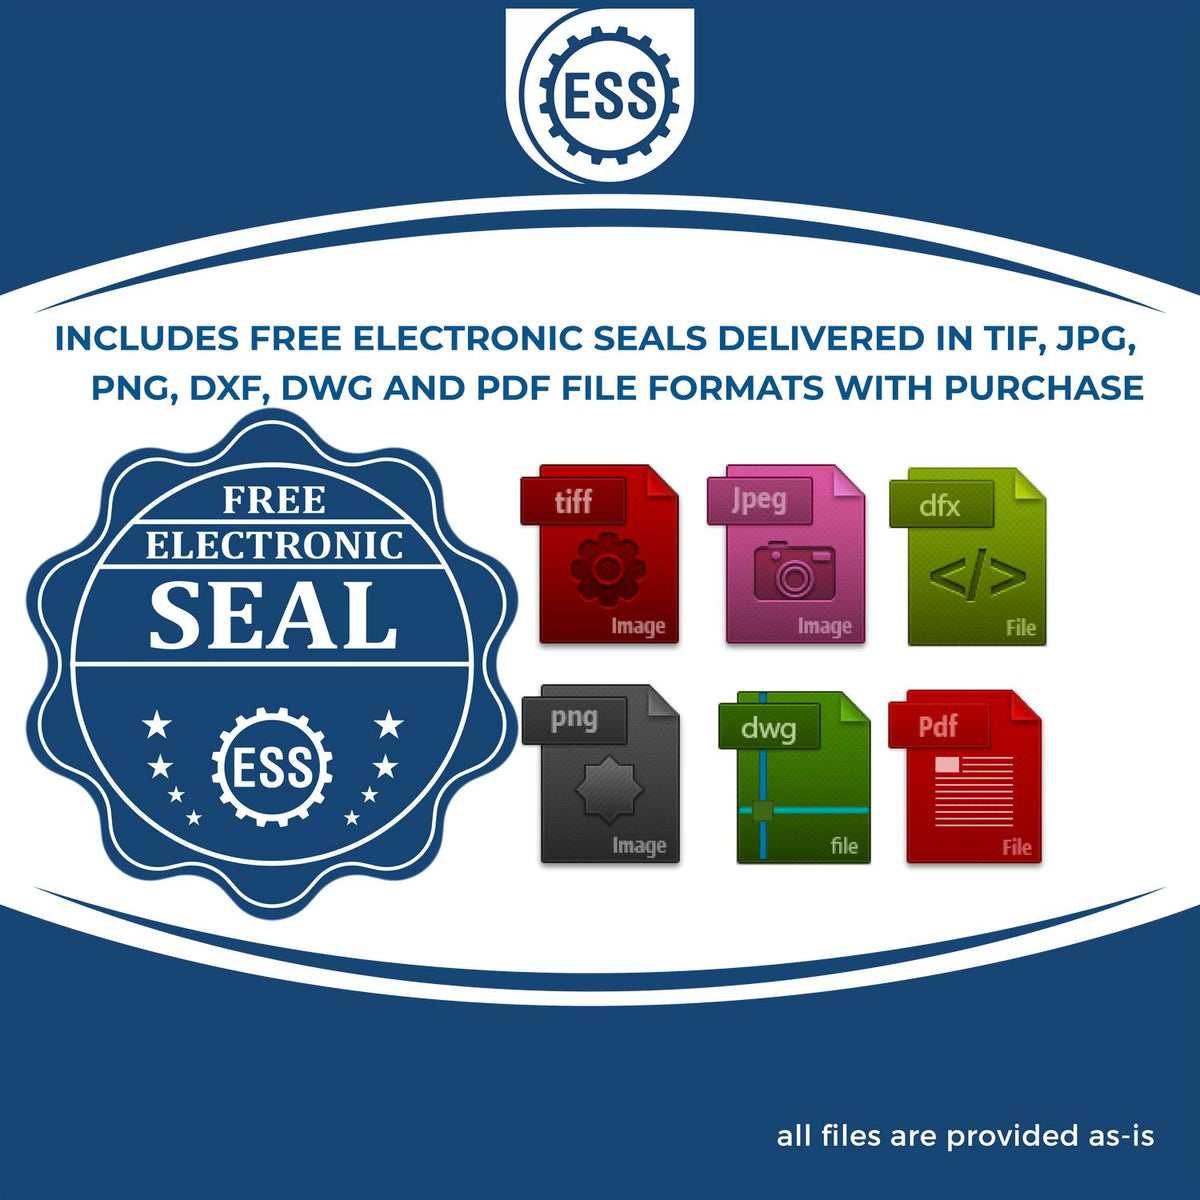 An infographic for the free electronic seal for the Hybrid Wisconsin Geologist Seal illustrating the different file type icons such as DXF, DWG, TIF, JPG and PNG.